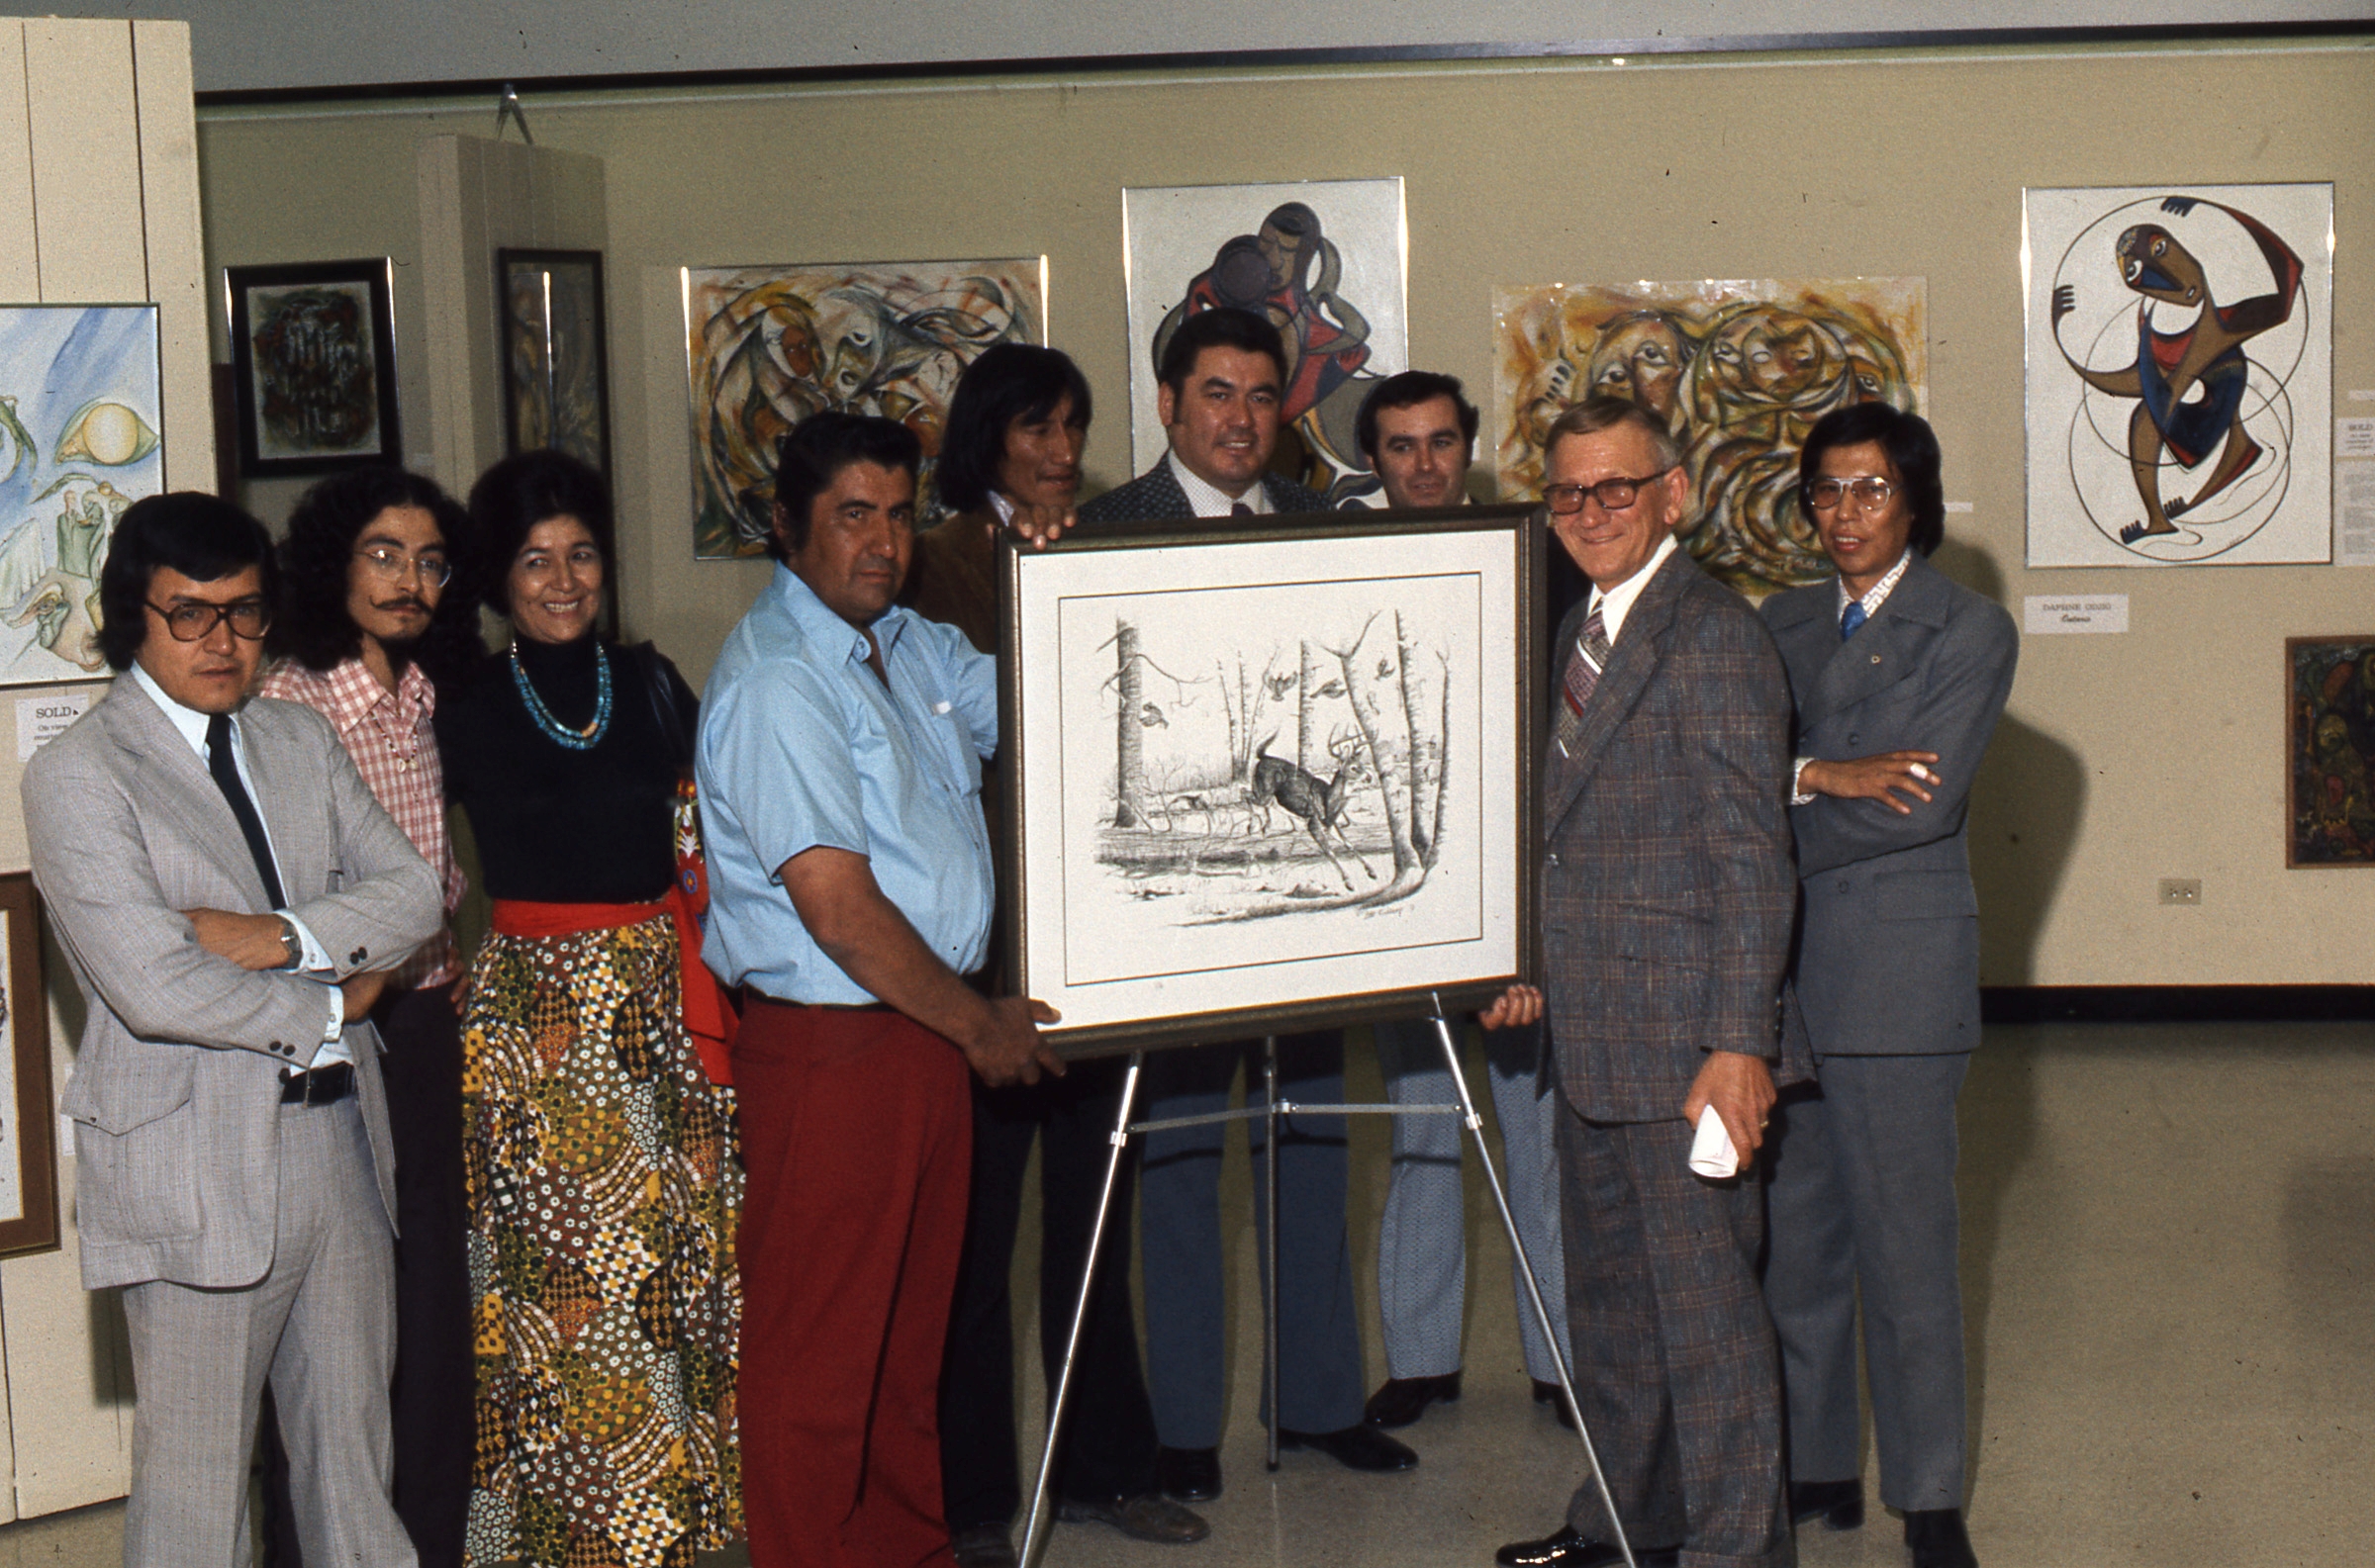 Nine people pose for a photograph beside a art piece on an easel. In the background, numerous artworks are mounted on the walls.